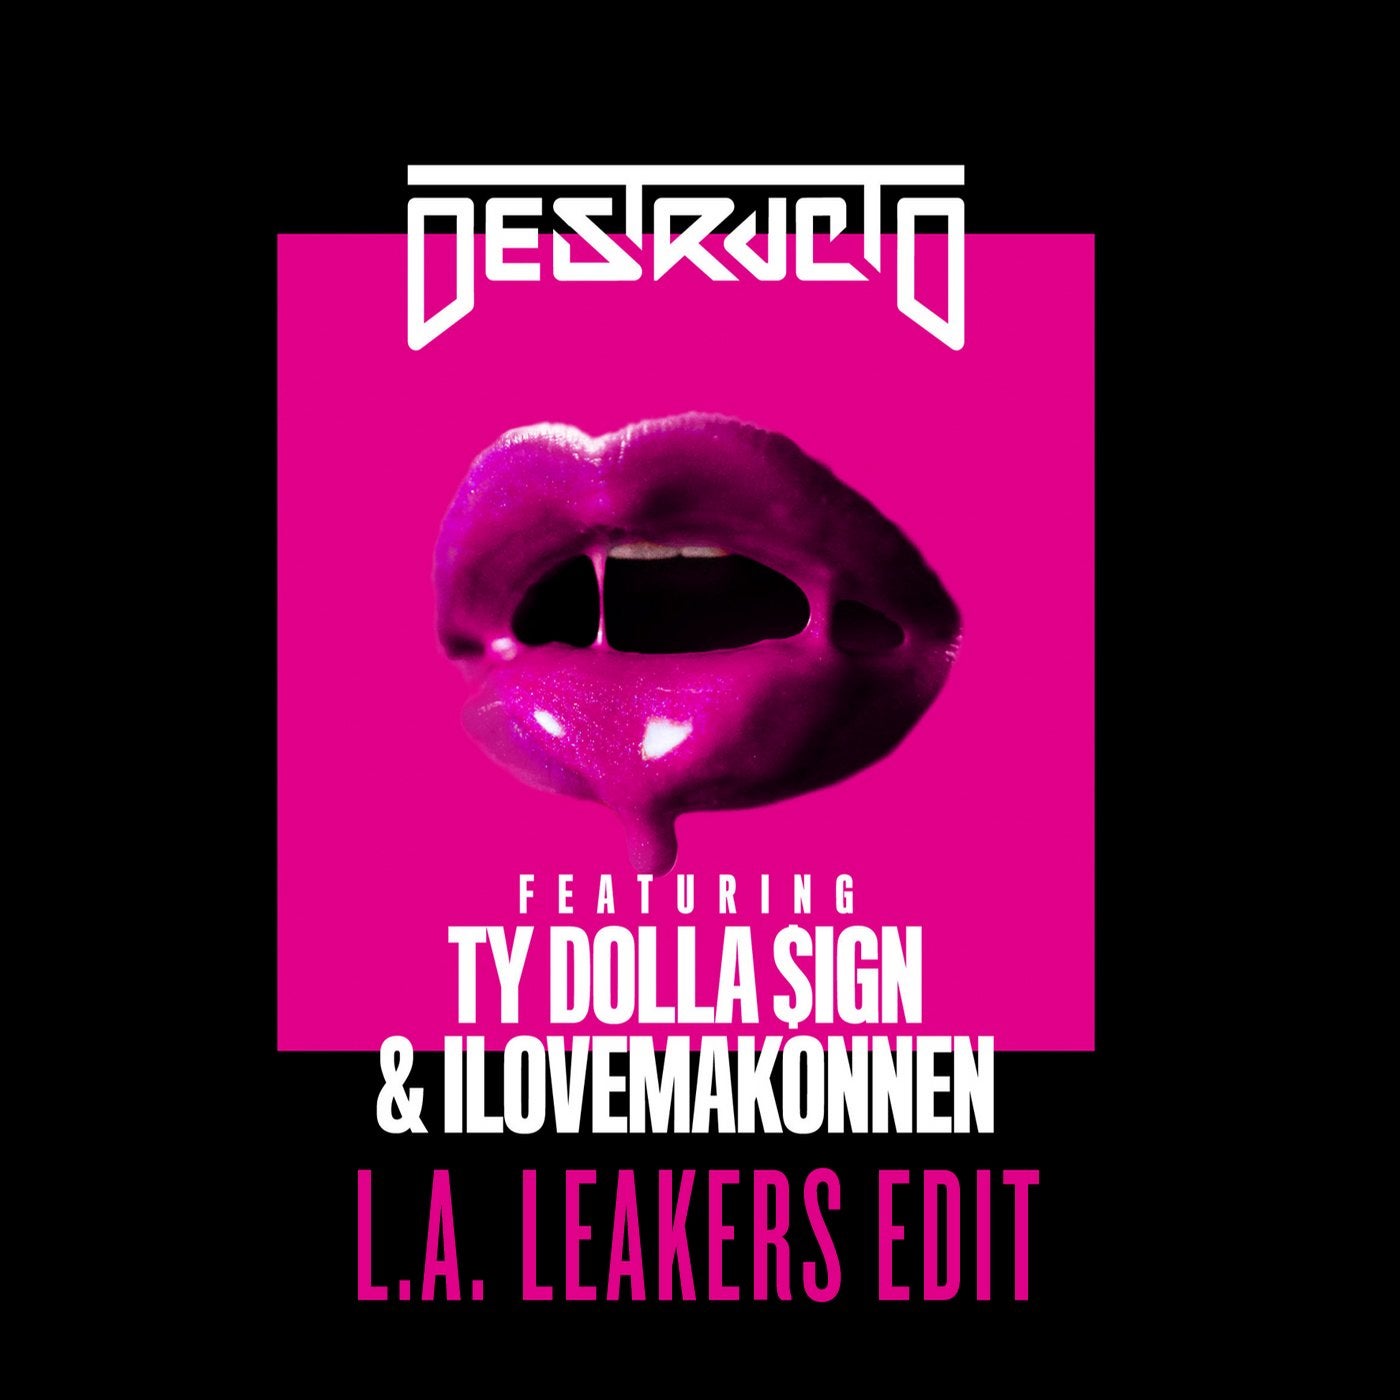 4 Real (L.A. Leakers Edit) feat. Ty Dolla $ign & I LOVE MAKONNEN